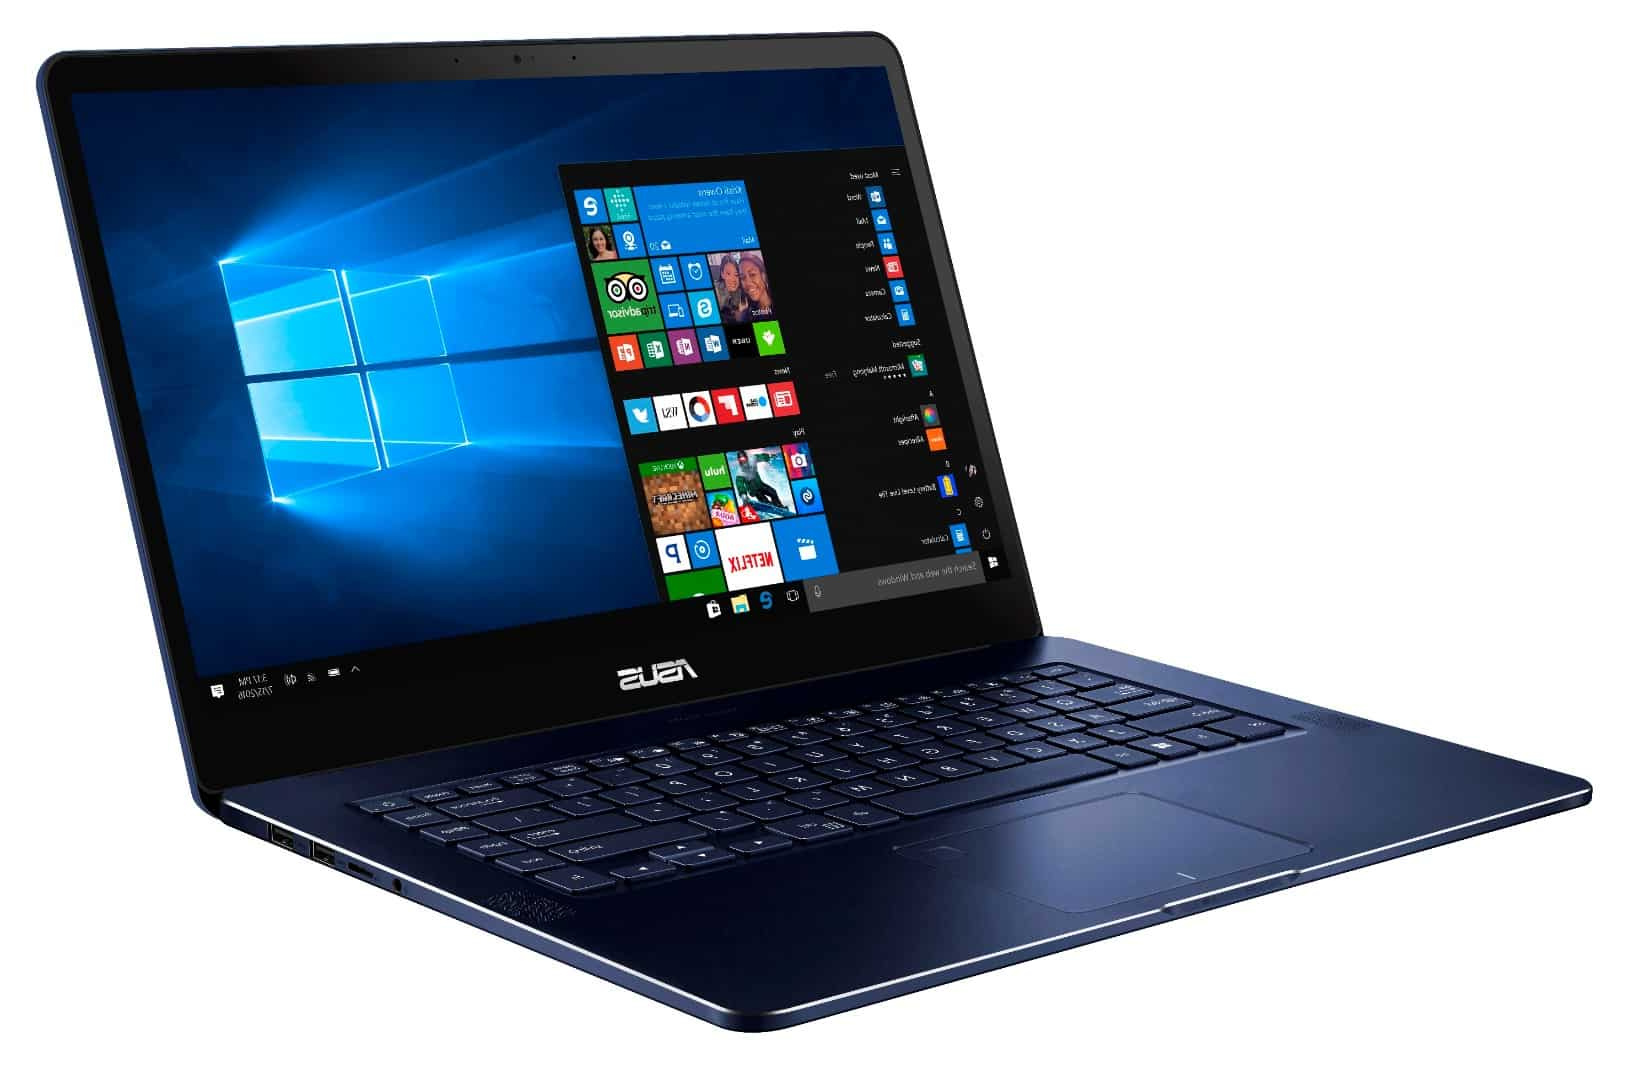 asus announces redesigned zenbook pro with nvidia gtx 1050 graphics and more